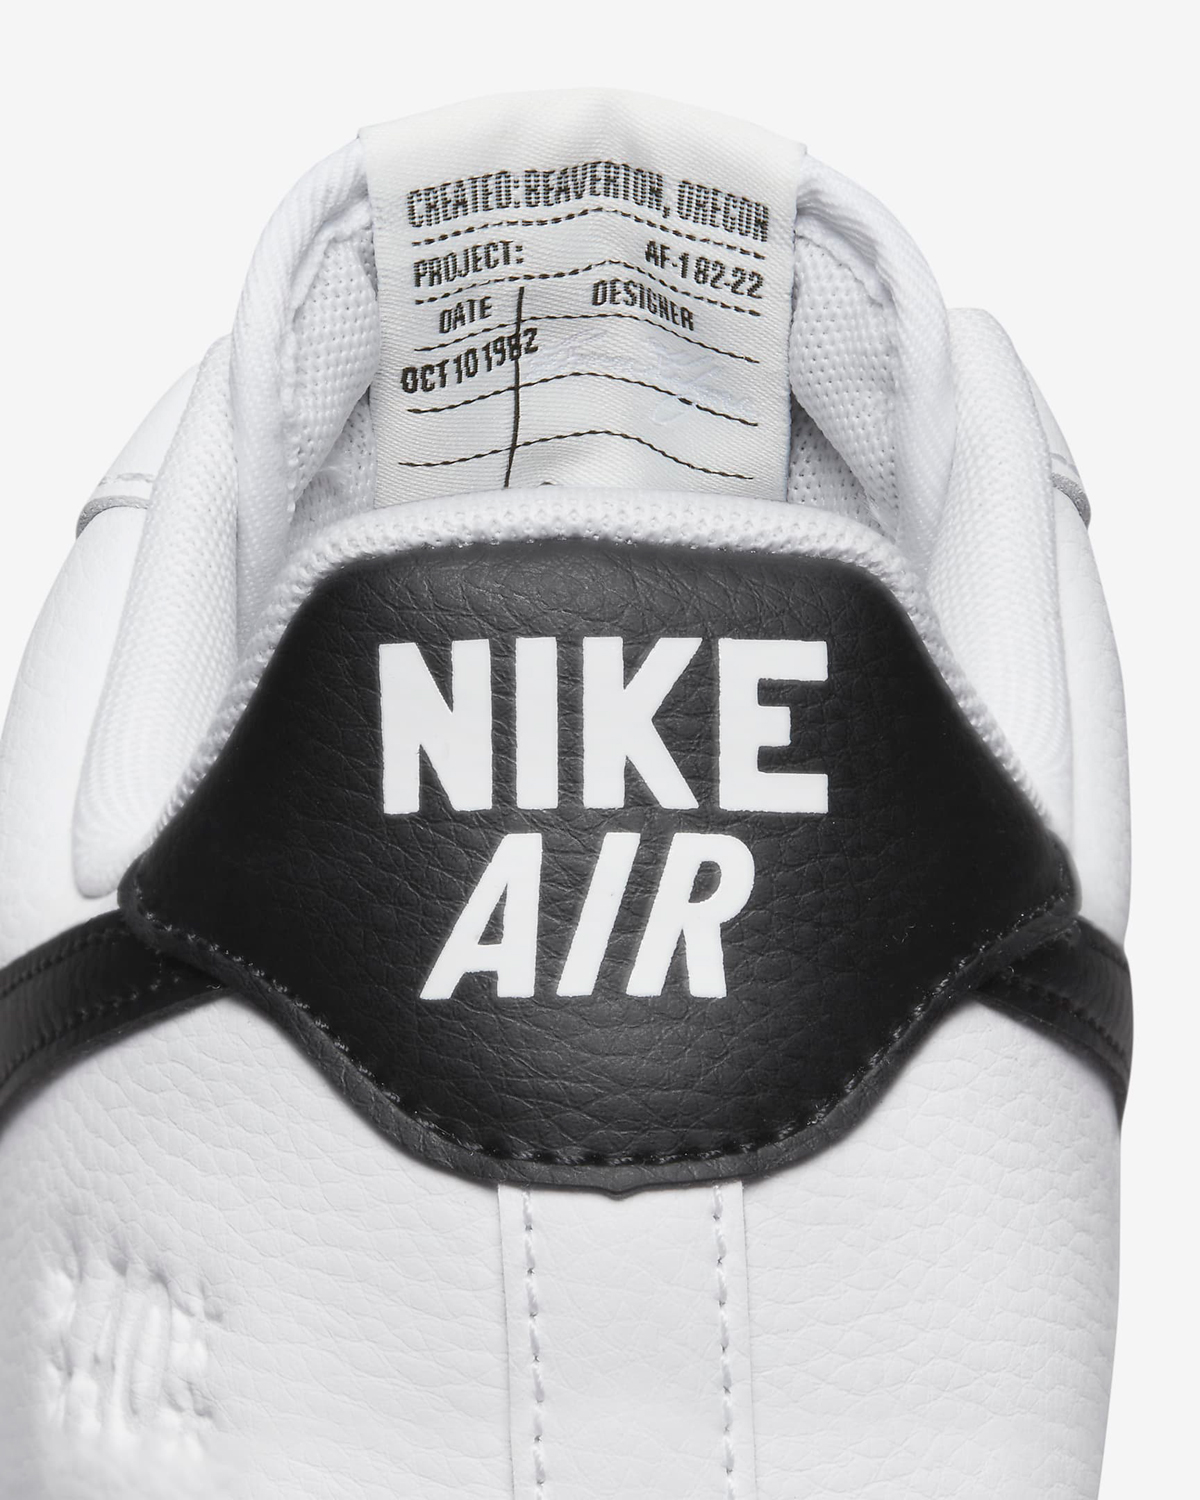 Nike-Air-Force-1-Low-40th-Anniversary-White-Black-Release-Date-10